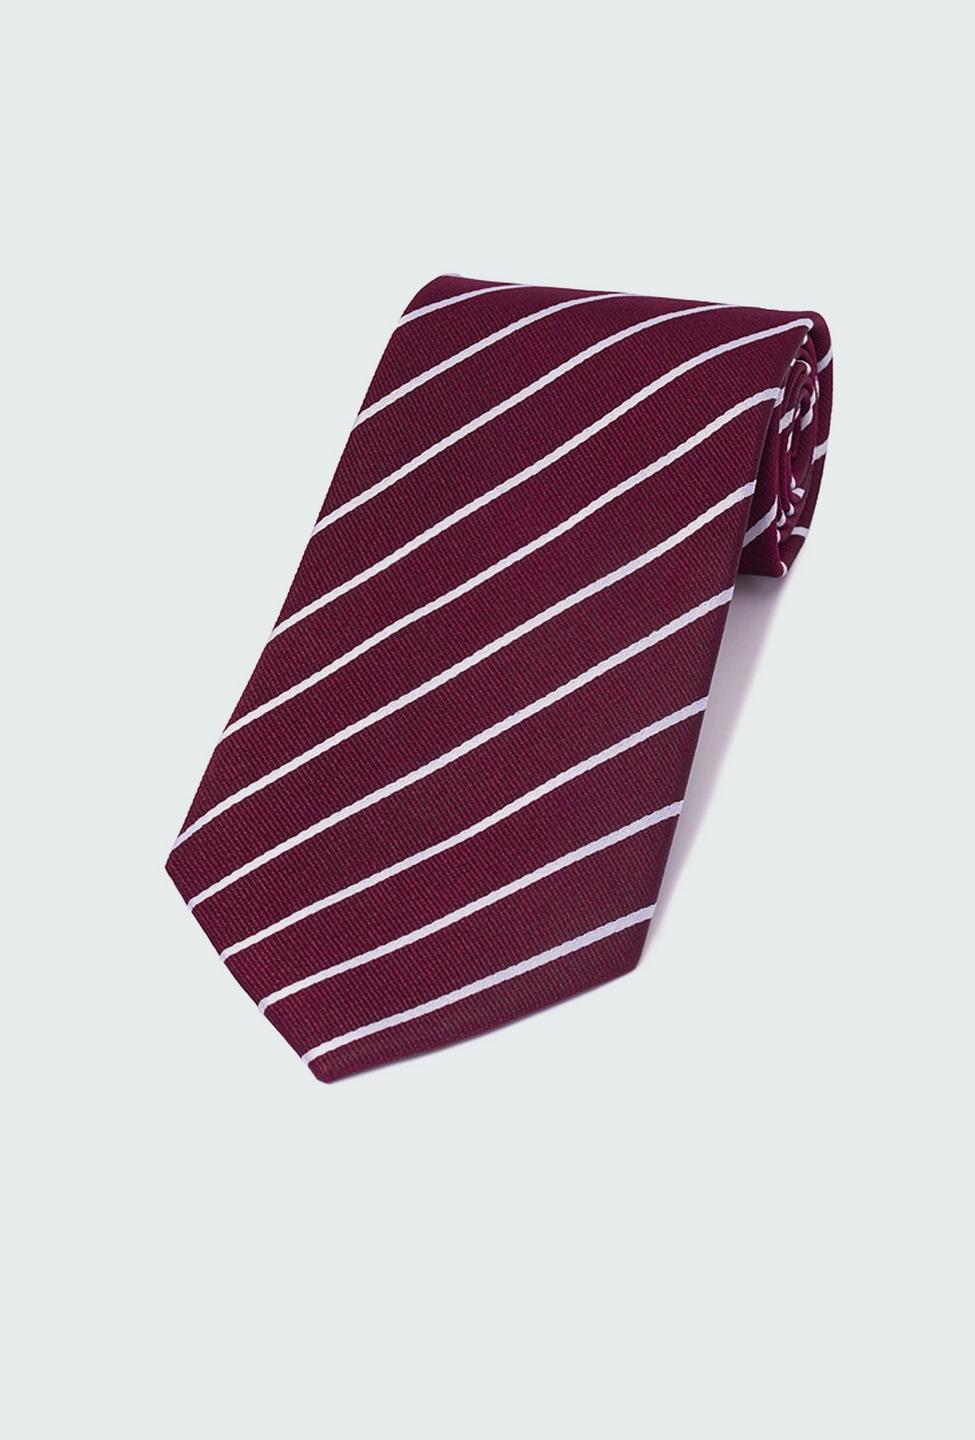 Burgundy tie - Striped Design from Indochino Collection